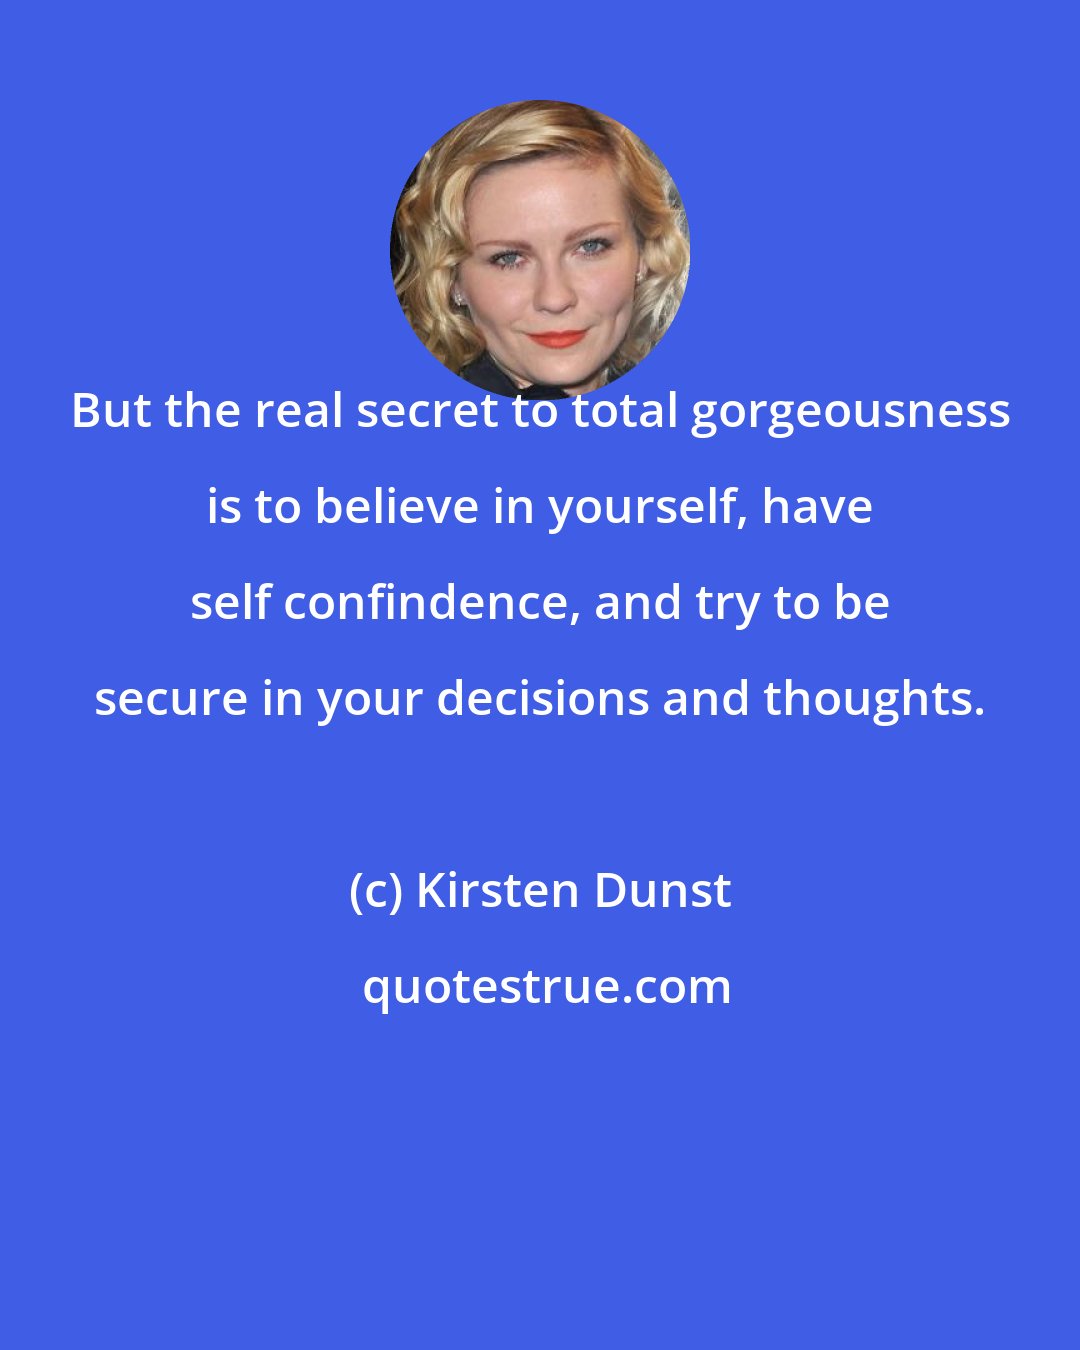 Kirsten Dunst: But the real secret to total gorgeousness is to believe in yourself, have self confindence, and try to be secure in your decisions and thoughts.